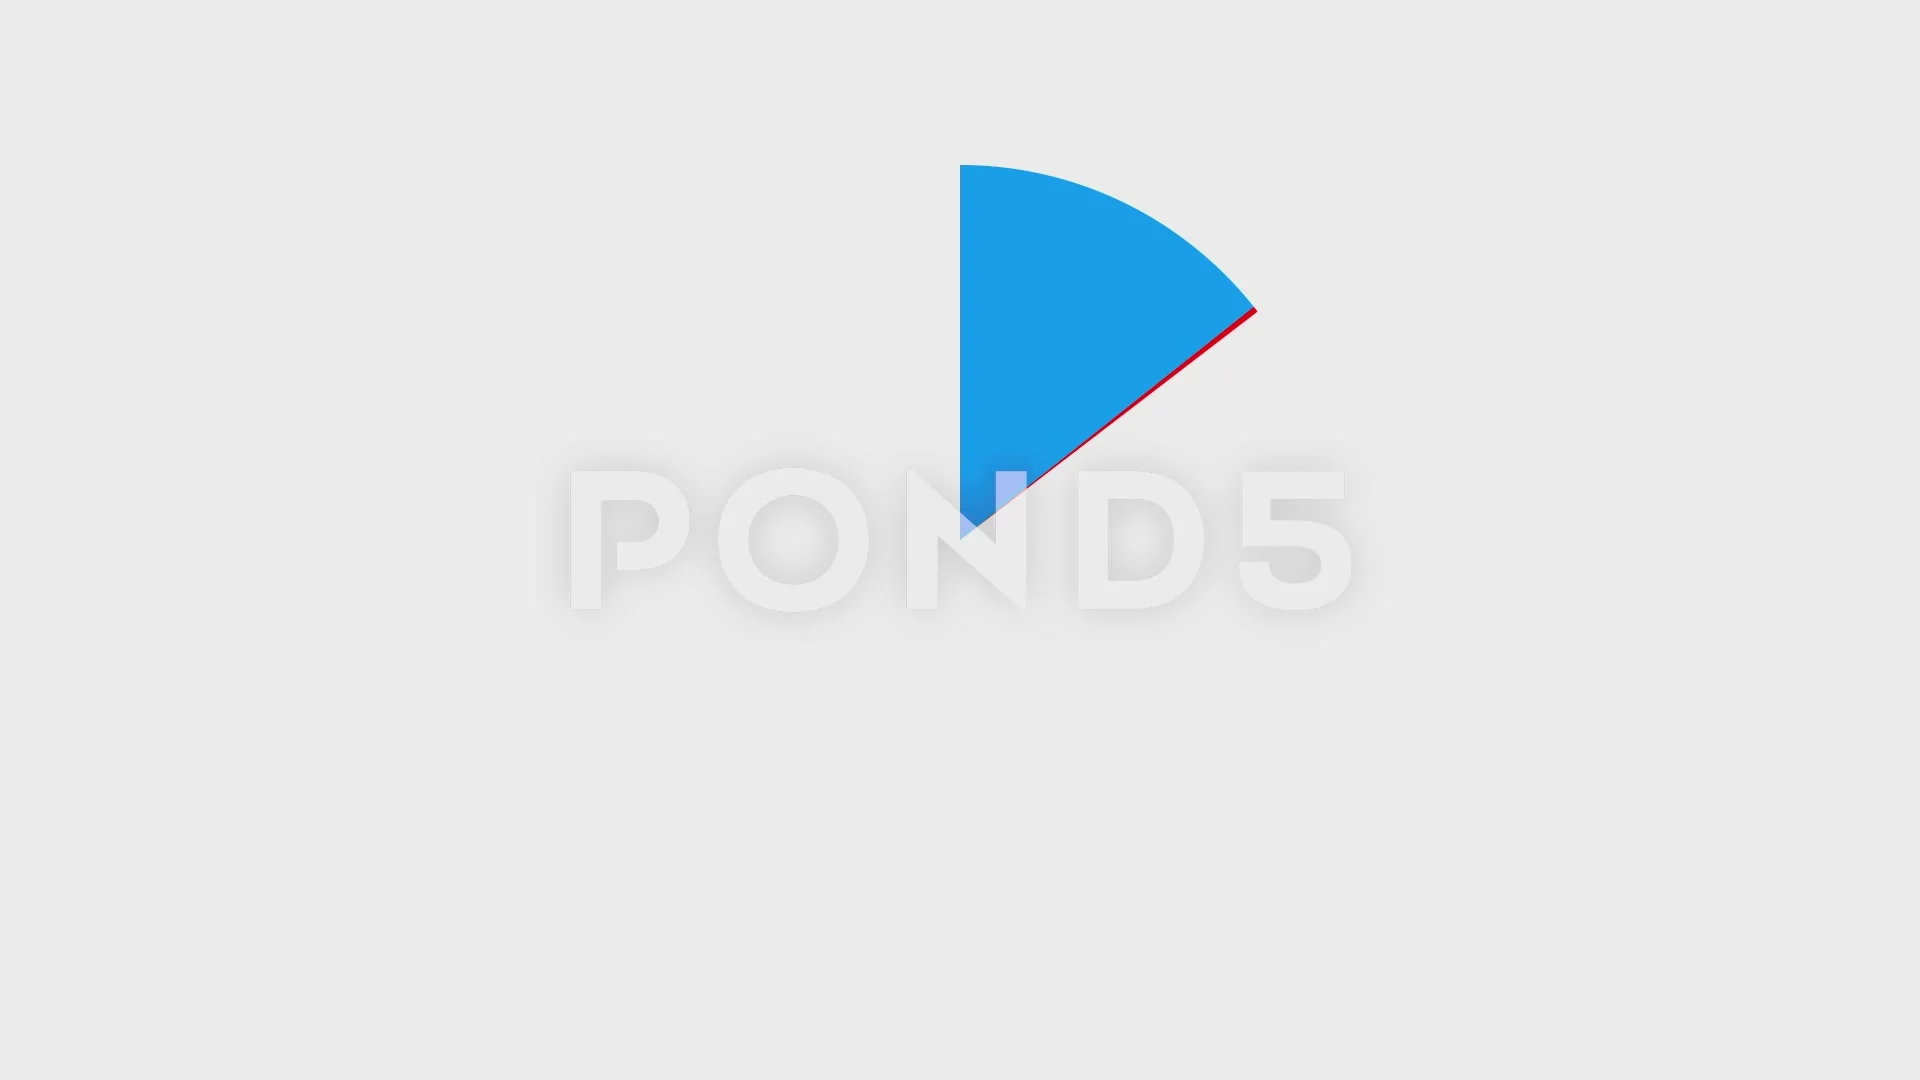 Pie Chart Animation Stock Footage ~ Royalty Free Stock Videos | Pond5